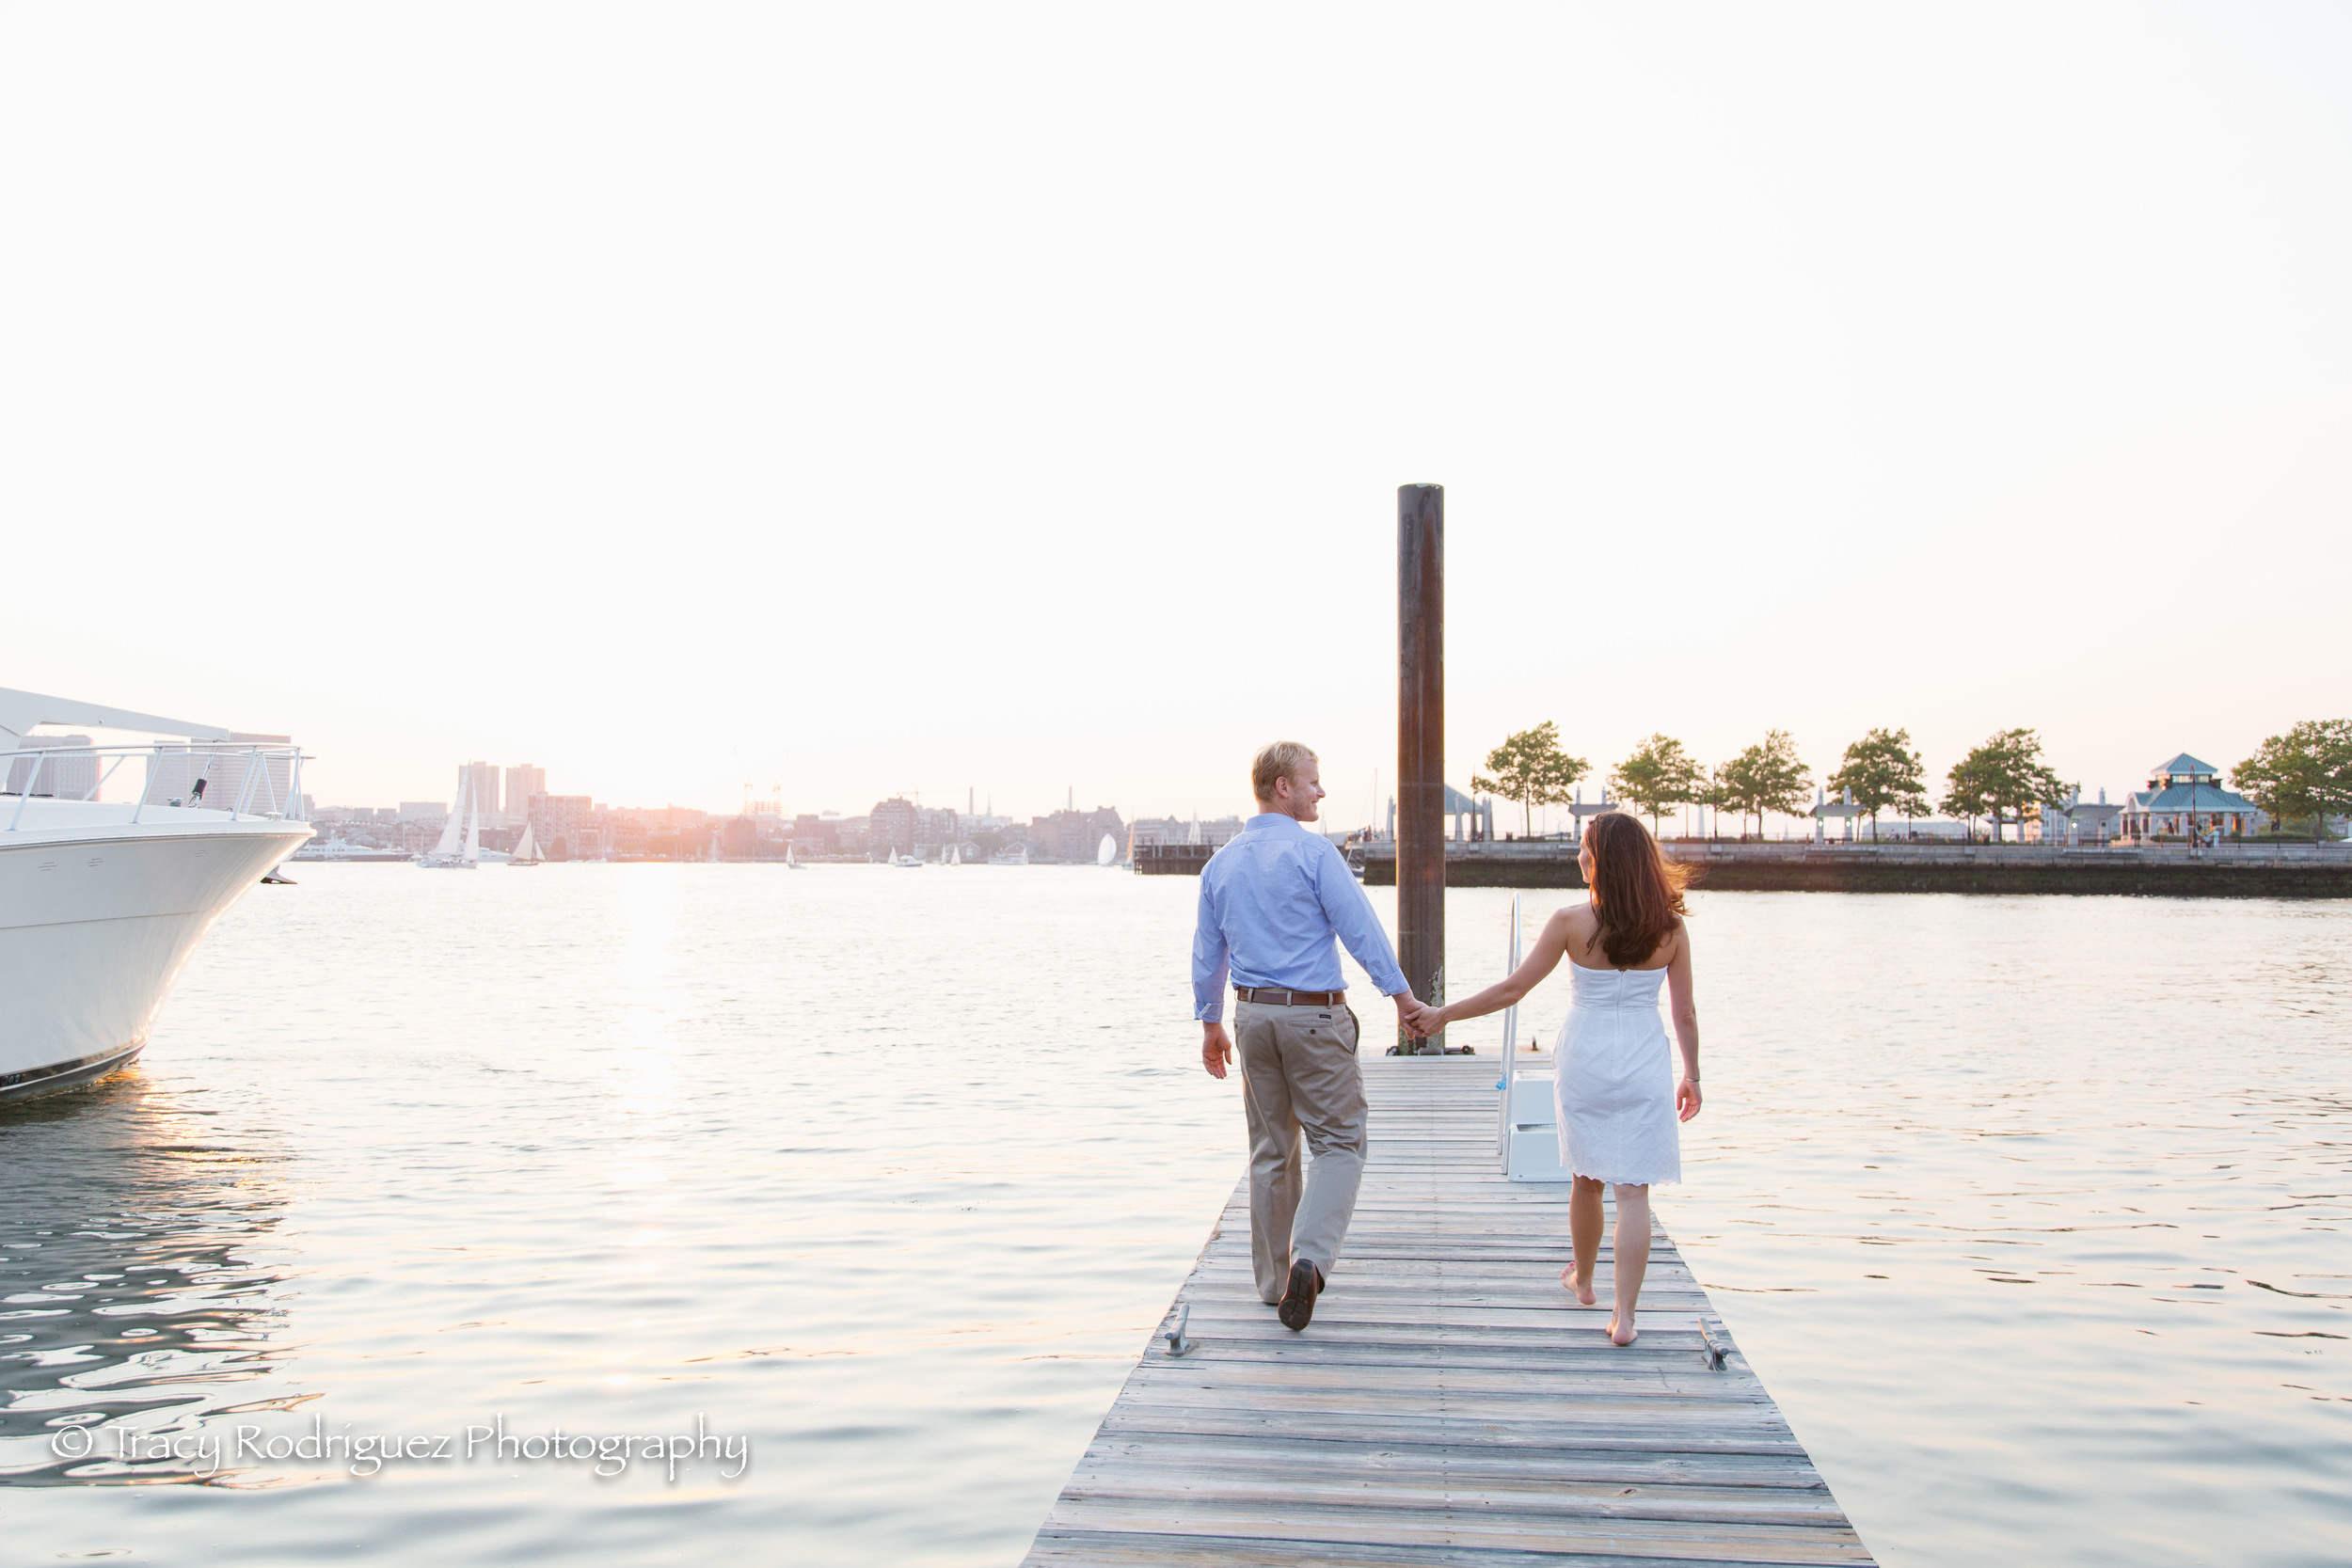 TracyRodriguezPhotography-Engagement-LowRes-33.jpg